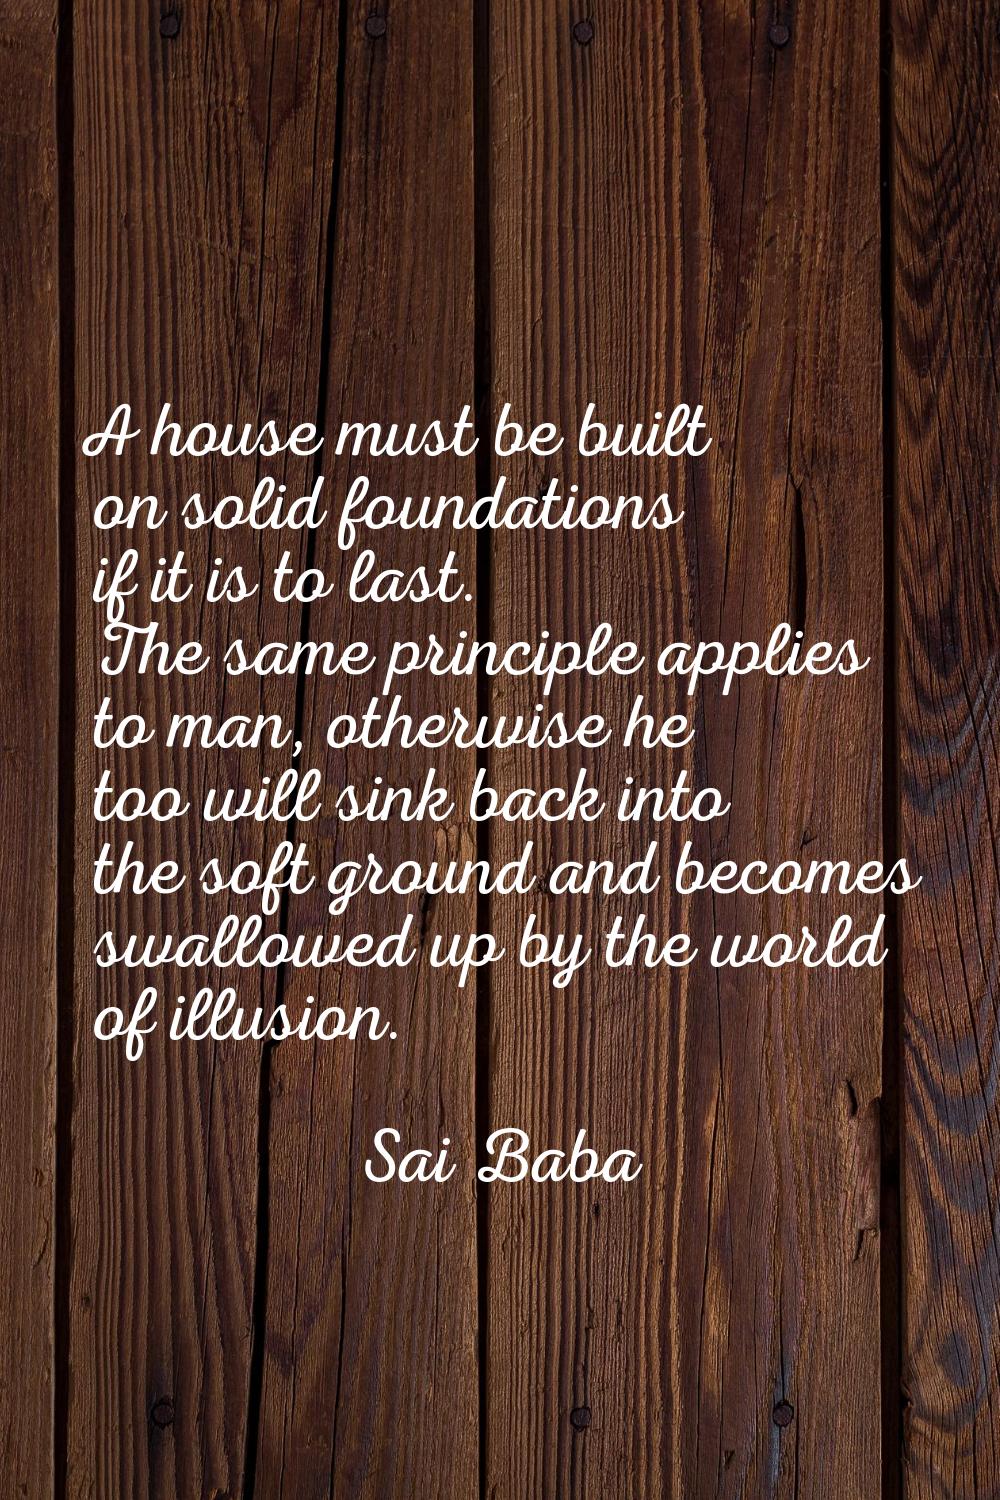 A house must be built on solid foundations if it is to last. The same principle applies to man, oth